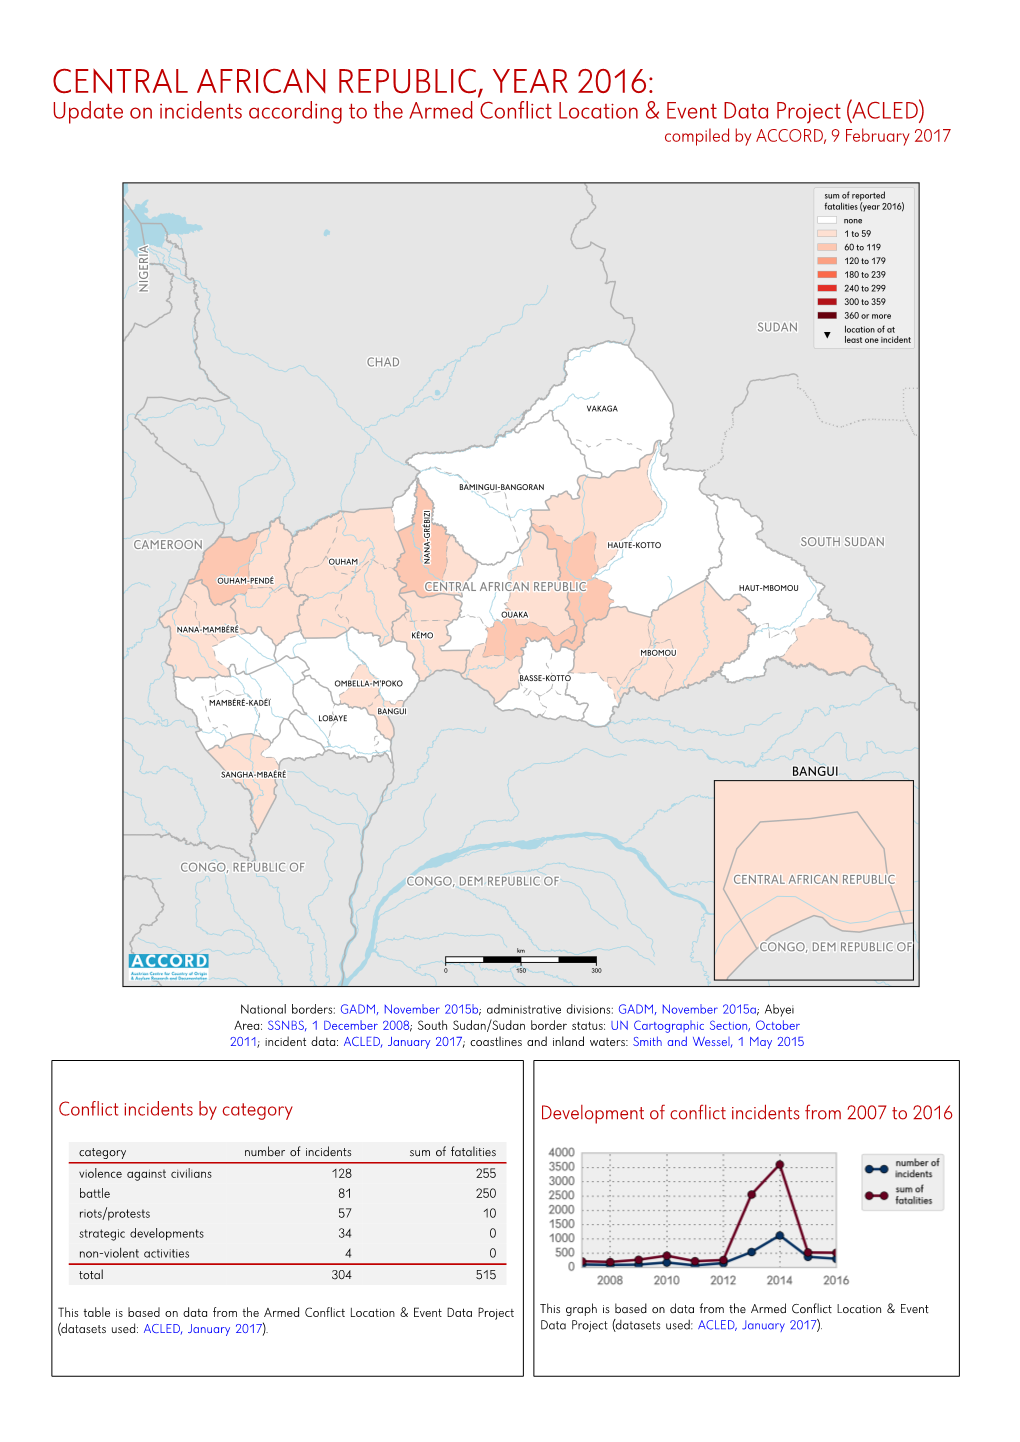 CENTRAL AFRICAN REPUBLIC, YEAR 2016: Update on Incidents According to the Armed Conflict Location & Event Data Project (ACLED) Compiled by ACCORD, 9 February 2017